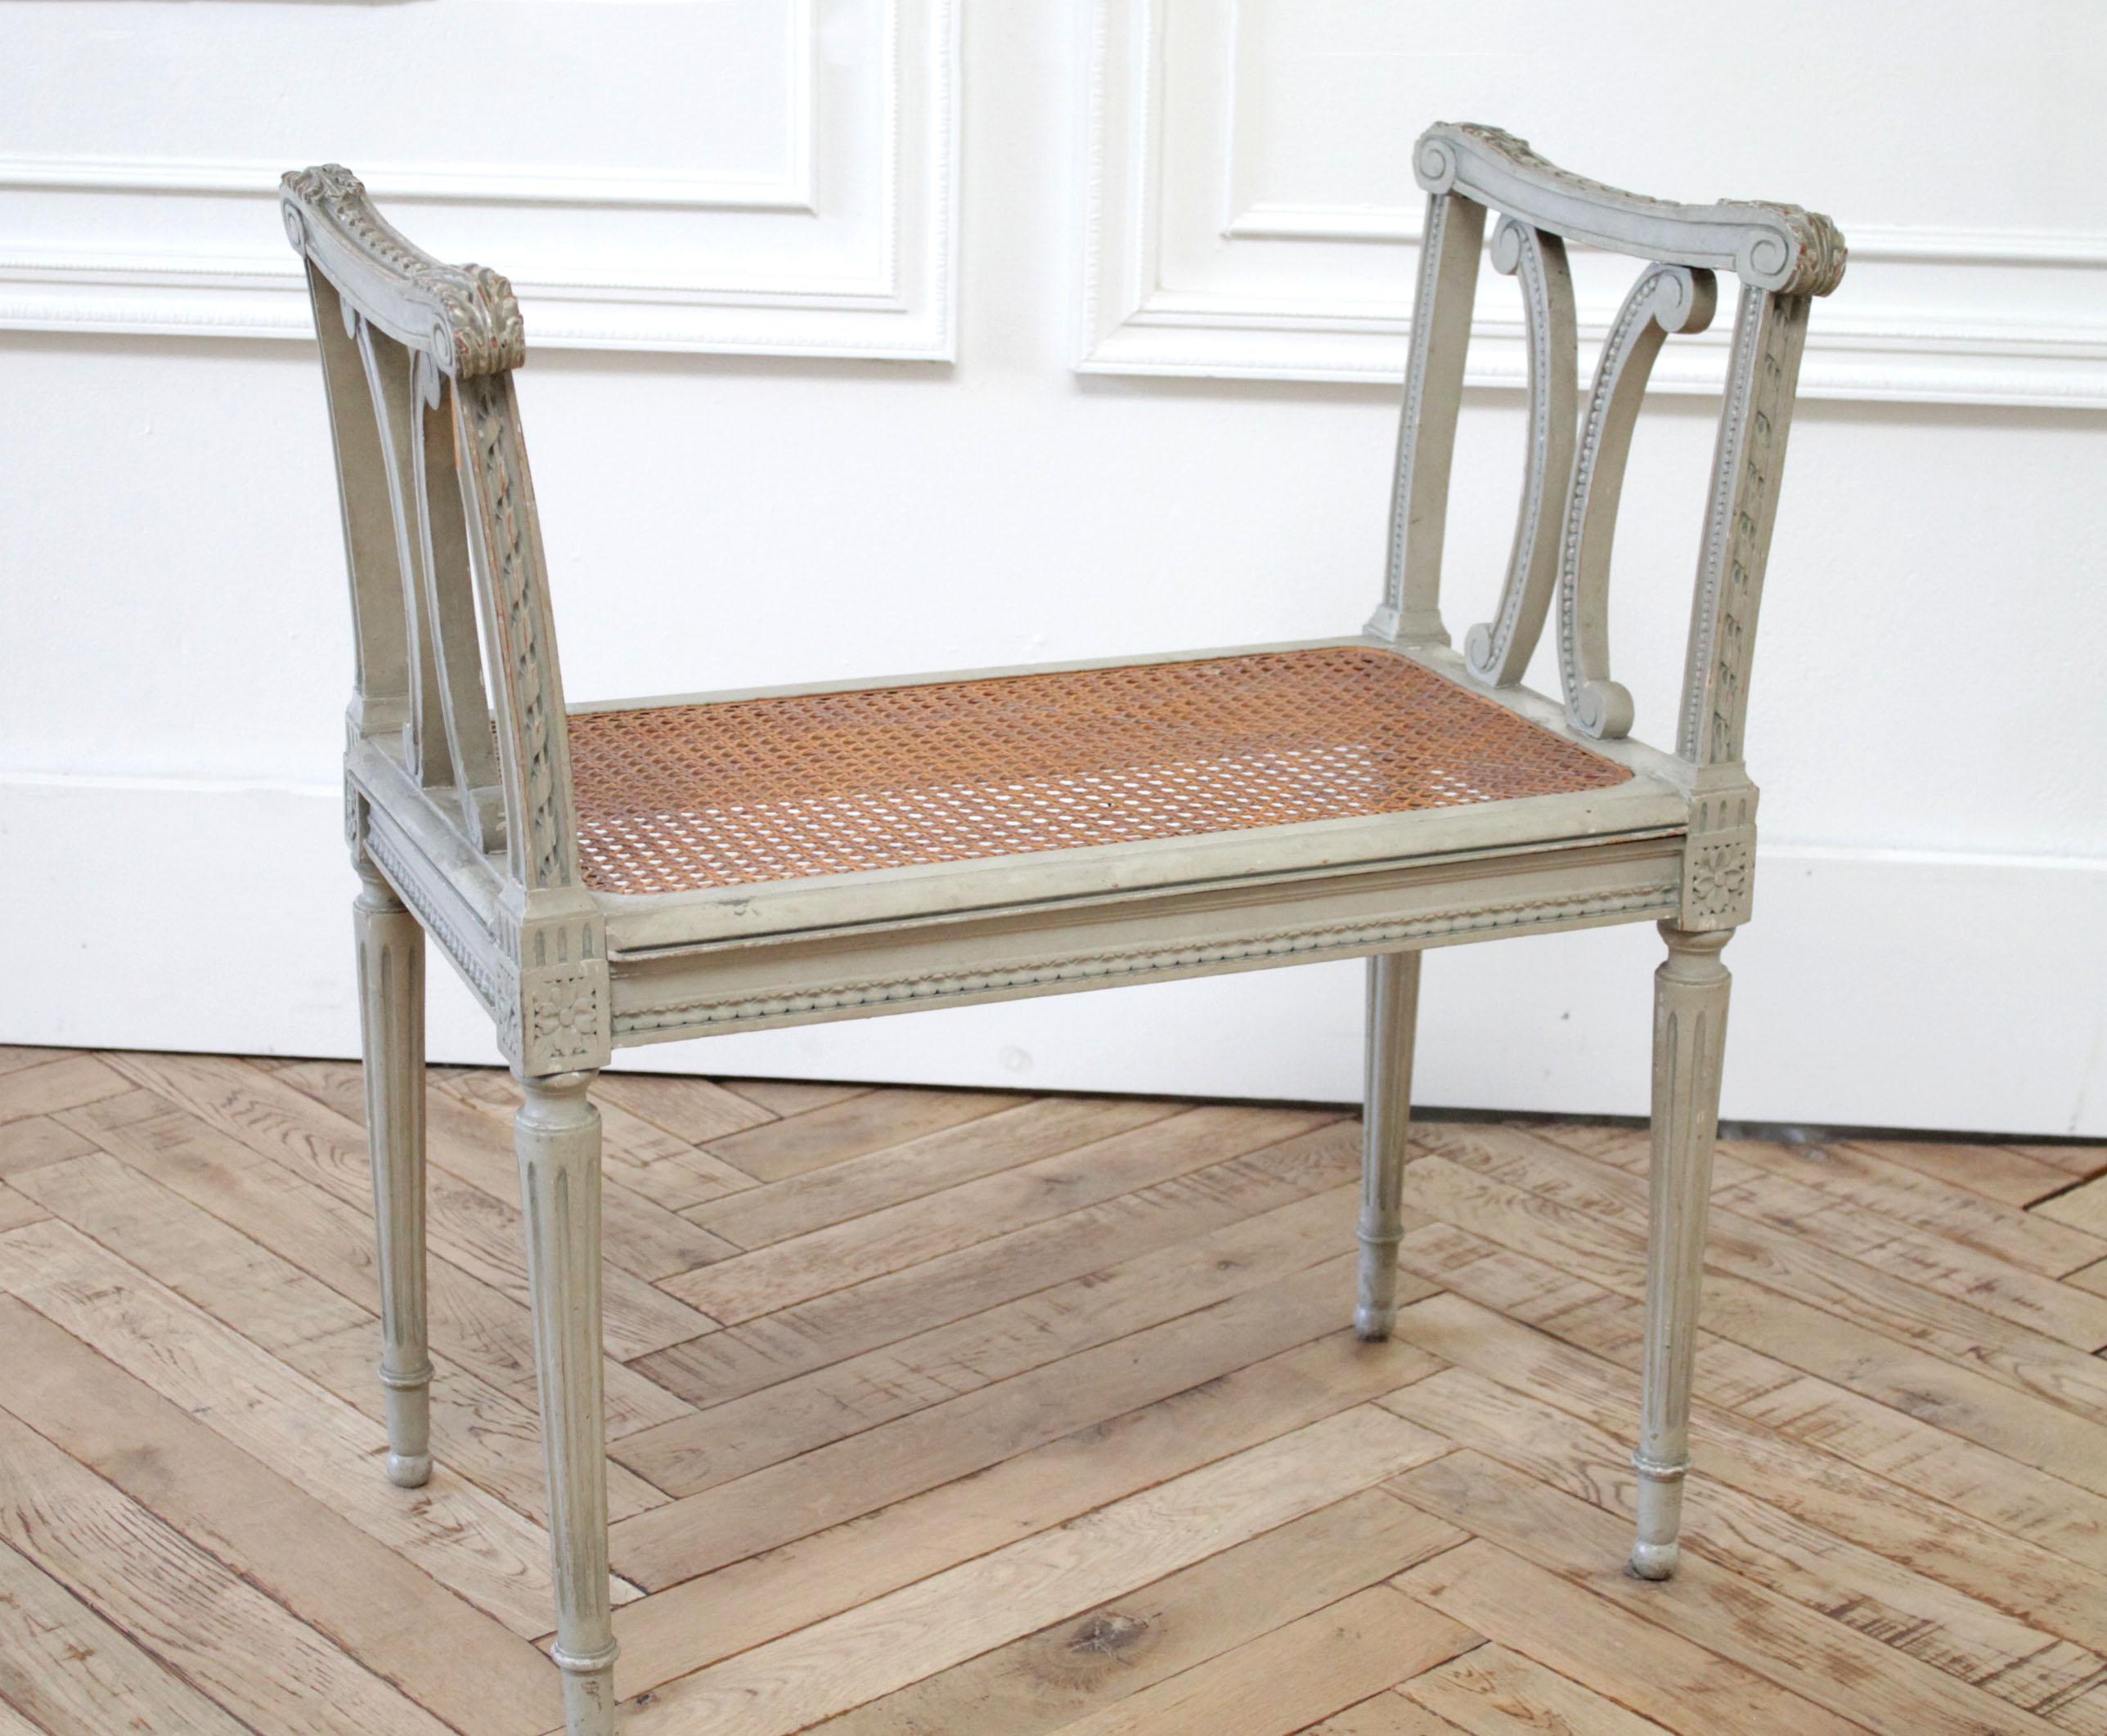 19th century painted and carved Louis XV style vanity bench
Original paint in a Swedish gray color with natural caning on the seat. Has a natural weathered finish patina.
Measures: 26